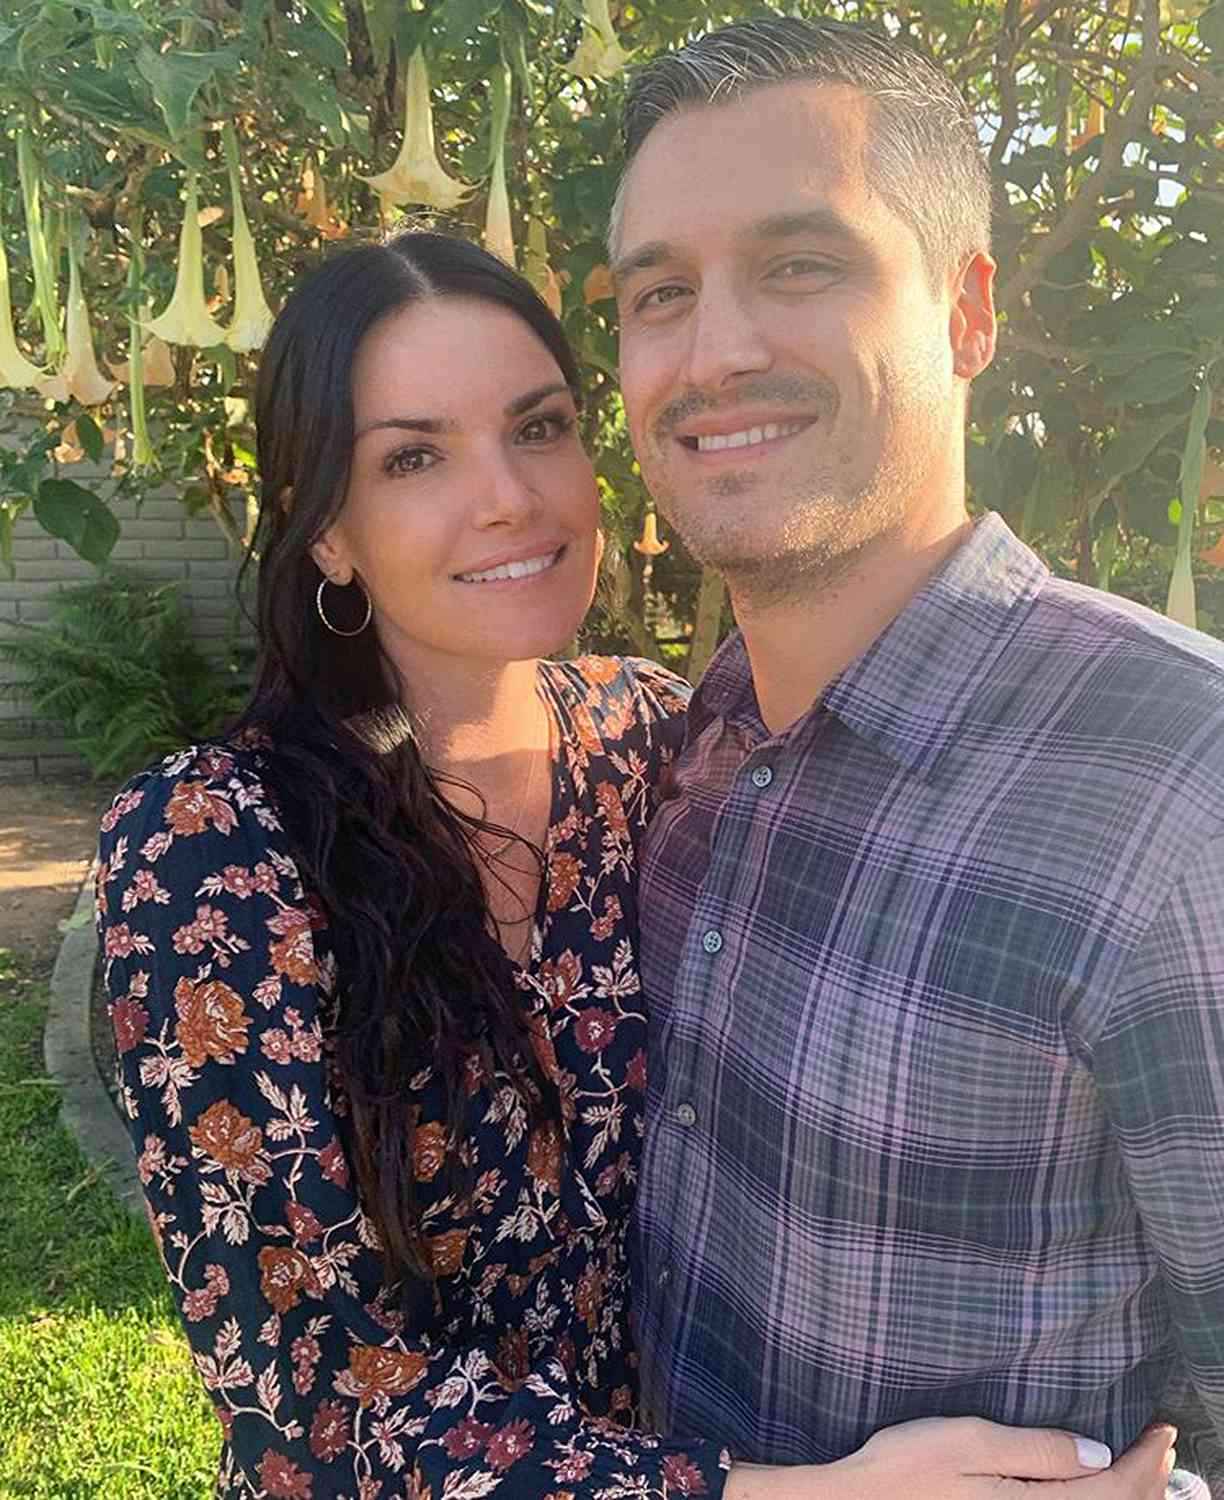 <p>The former Bachelor contestant married her fianc&eacute; Humberto Preciado on Oct. 16 in an intimate ceremony in Sedona, Arizona, PEOPLE has confirmed exclusively.</p>
                            <p>"When I met Humberto, it was a no-brainer," Robertson, 37, told PEOPLE. "I know this is meant to be."</p>
                            <p>The nuptials, which were held outdoors with only immediate family in attendance, took place four months after the birth of the couple's first child, son Joaquin Ramon.</p>
                            <p>"Planning a wedding while expecting a baby was definitely stressful," admitted Robertson. "But we initially had a much bigger wedding and because of COVID-19, we scaled it way back. It feels really good to just have our nearest and dearest with us to celebrate. Sweet and simple!"</p>
                            <p>The realtor was engaged to former Bachelor Ben Flajnik before they split in 2012. She met Preciado, an attorney, last year when he liked some of her photos on Instagram and she direct messaged him on the app.</p>
                            